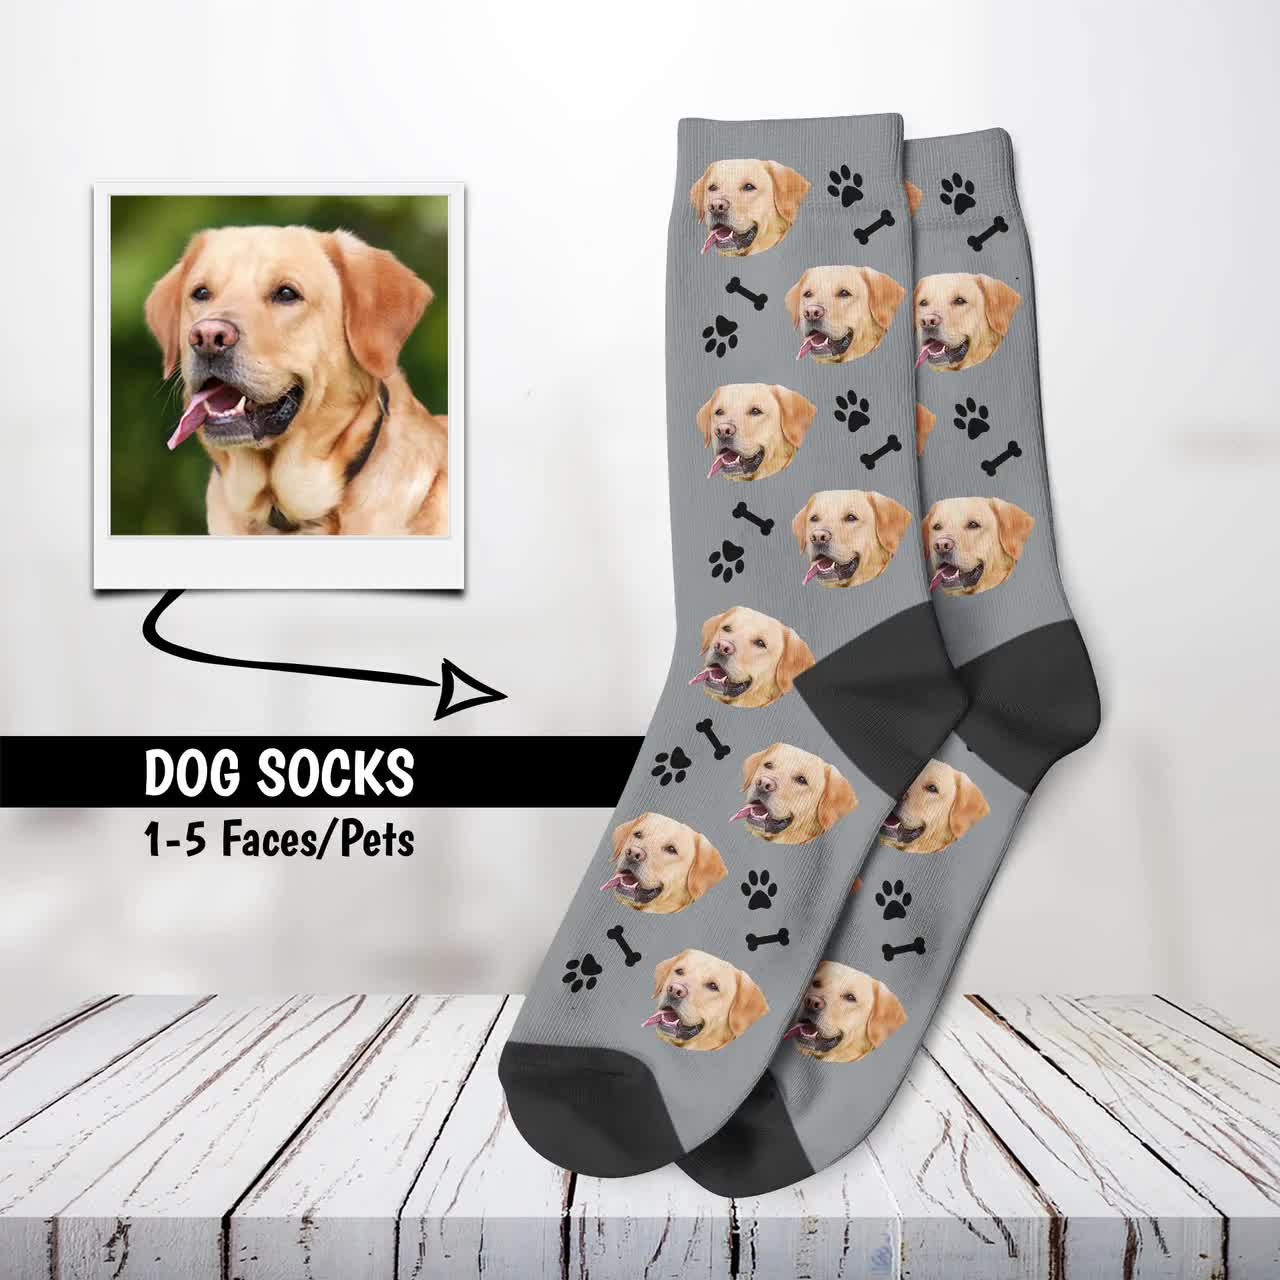 Custom Dog Socks, Personalized Pet Socks, Face Socks, Funny Dog Gift,  Personalized Gift, Photo Socks, Father's Day Gift. Picutres Socks 